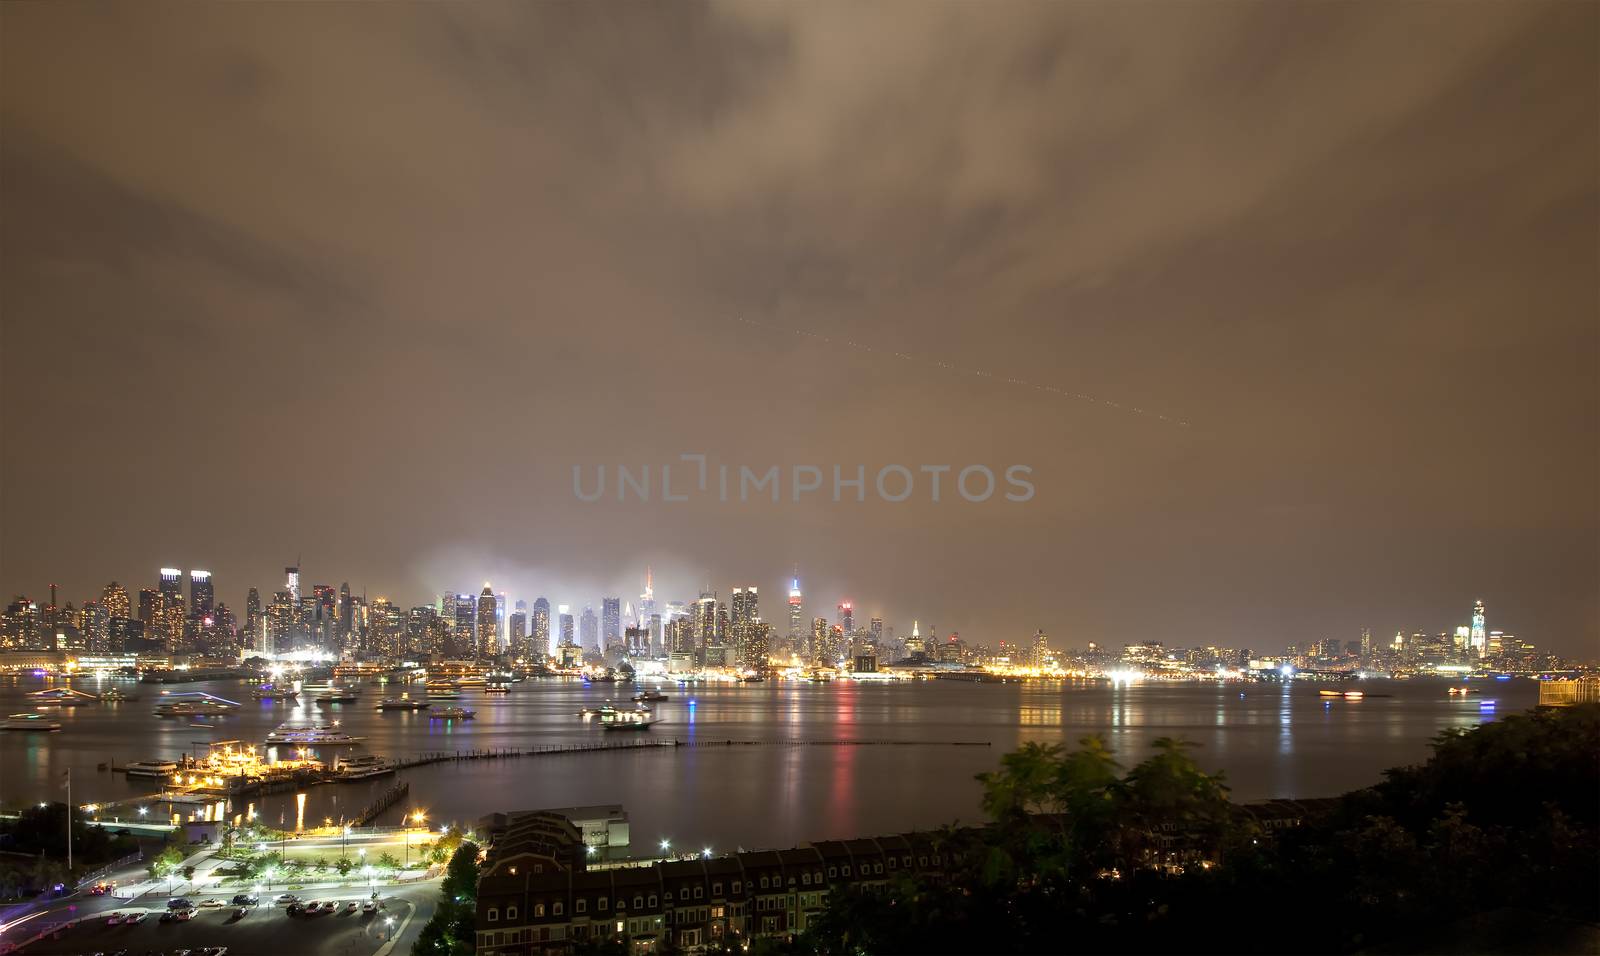 The panoramic view of the complete Manhattan Island at night from New Jersey side